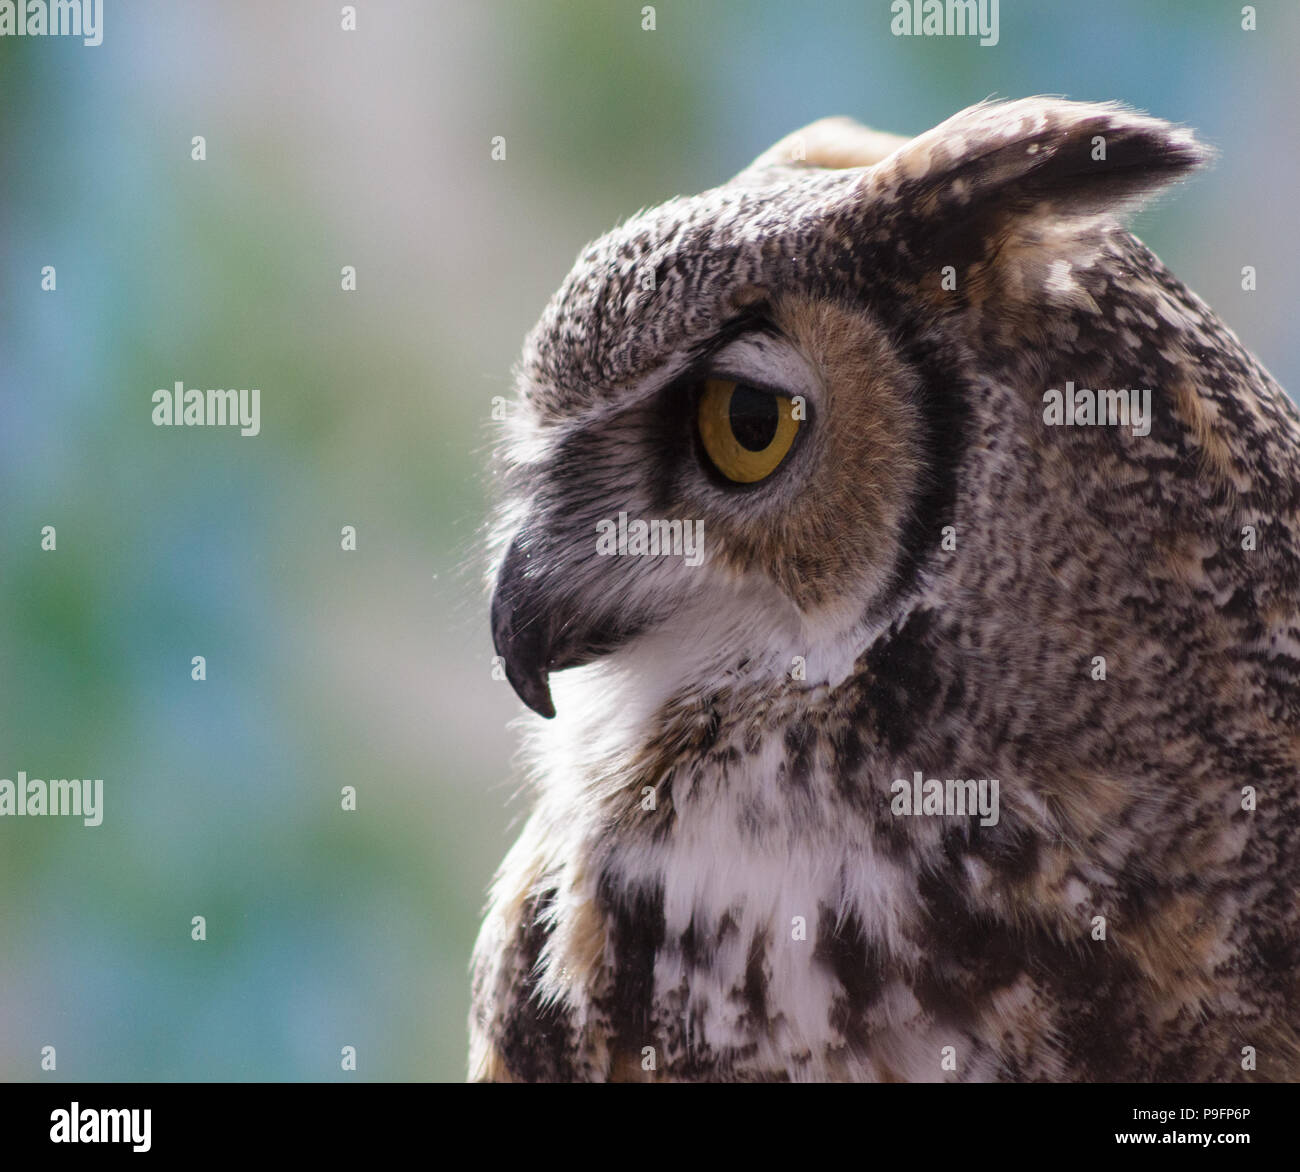 A profile of a Great Horned Owl with its "ears" back looking majestic. Stock Photo